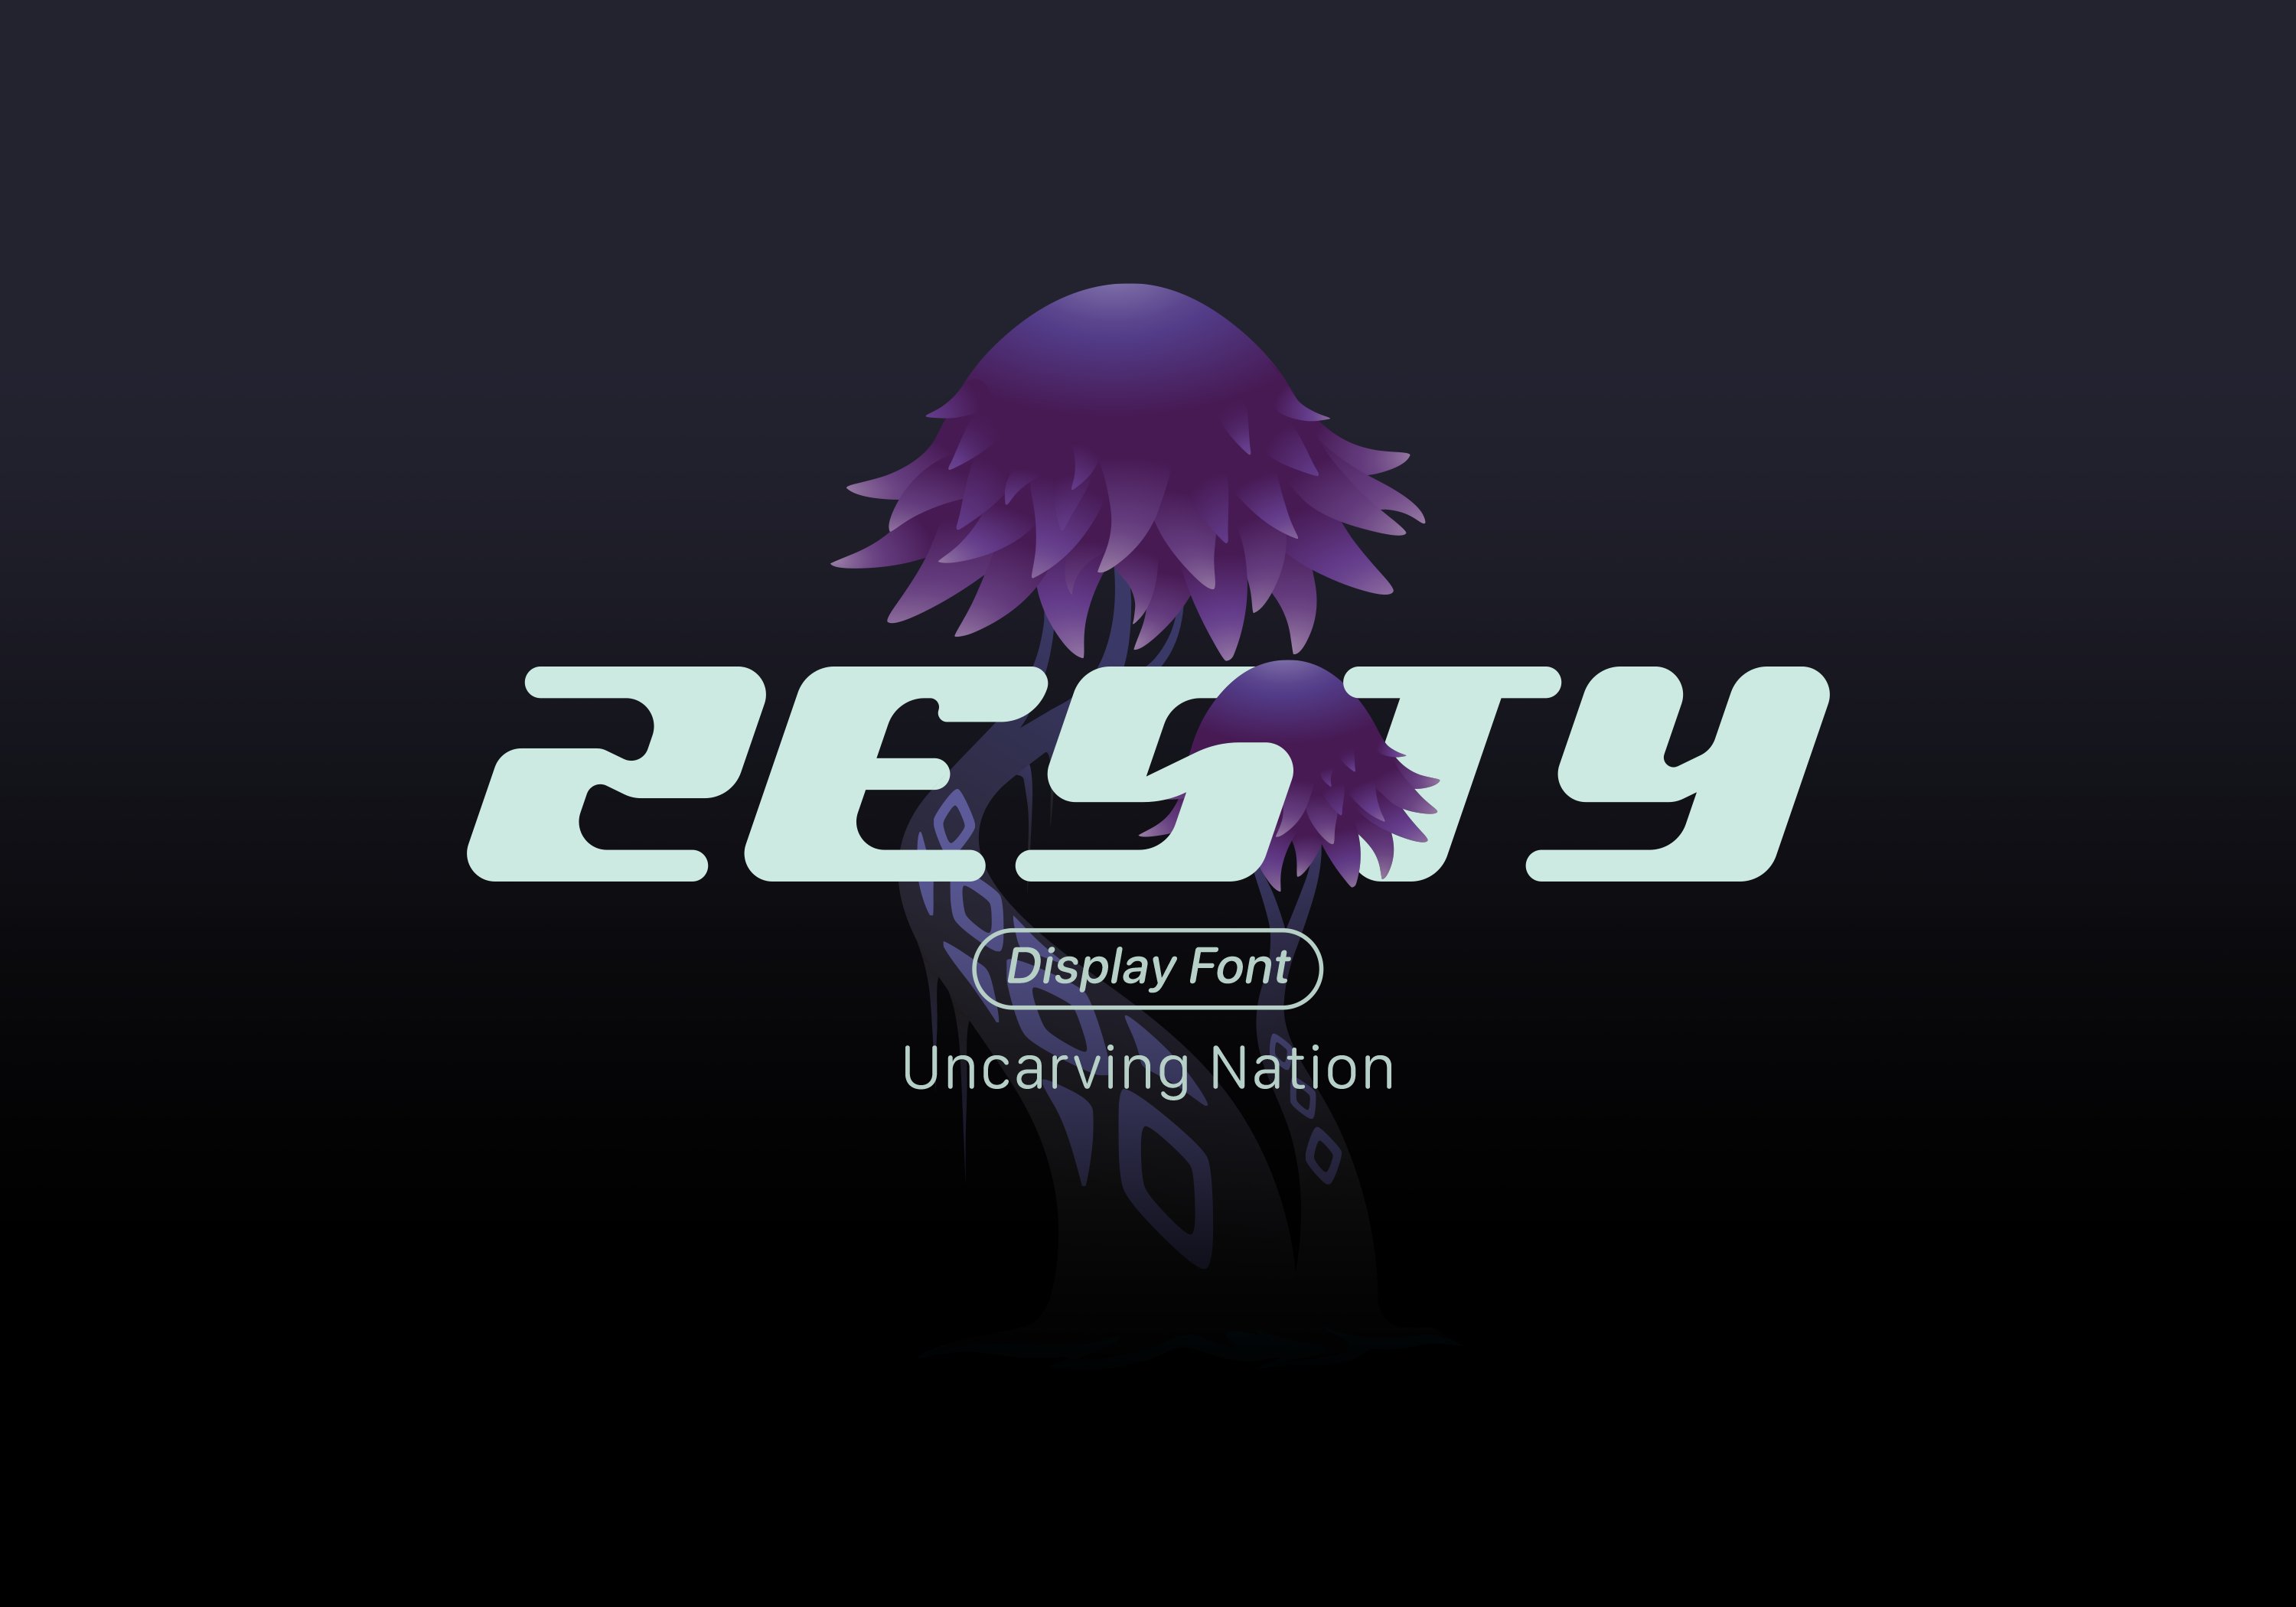 Zesty - Display font cover image.